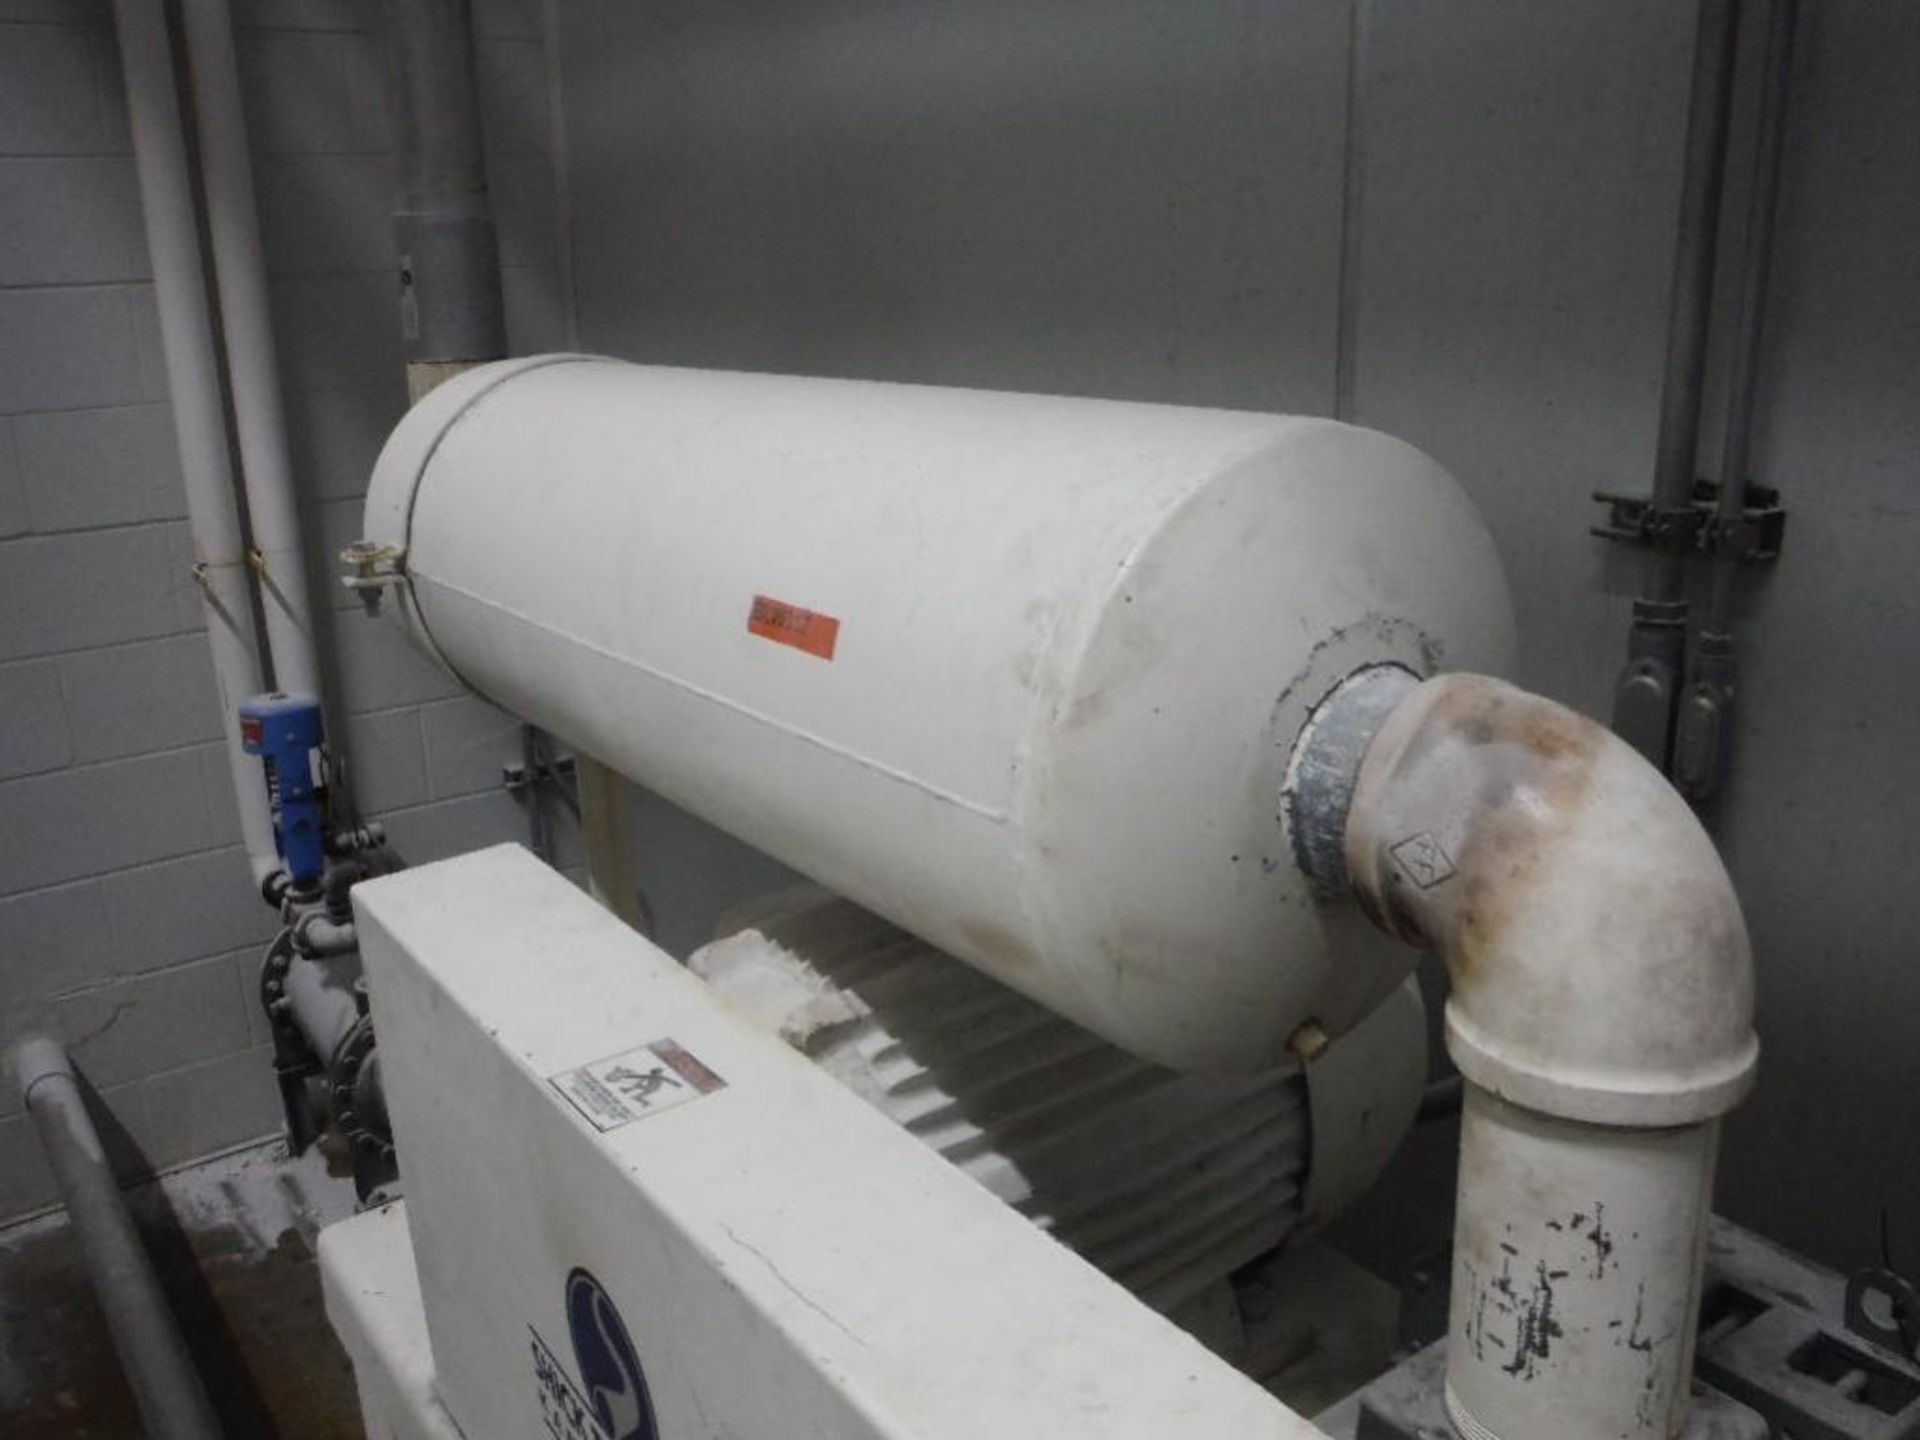 Shick rotary lobe blower, Model 96 G 91711, 50 hp - Rigging Fee: $300 - Image 3 of 7